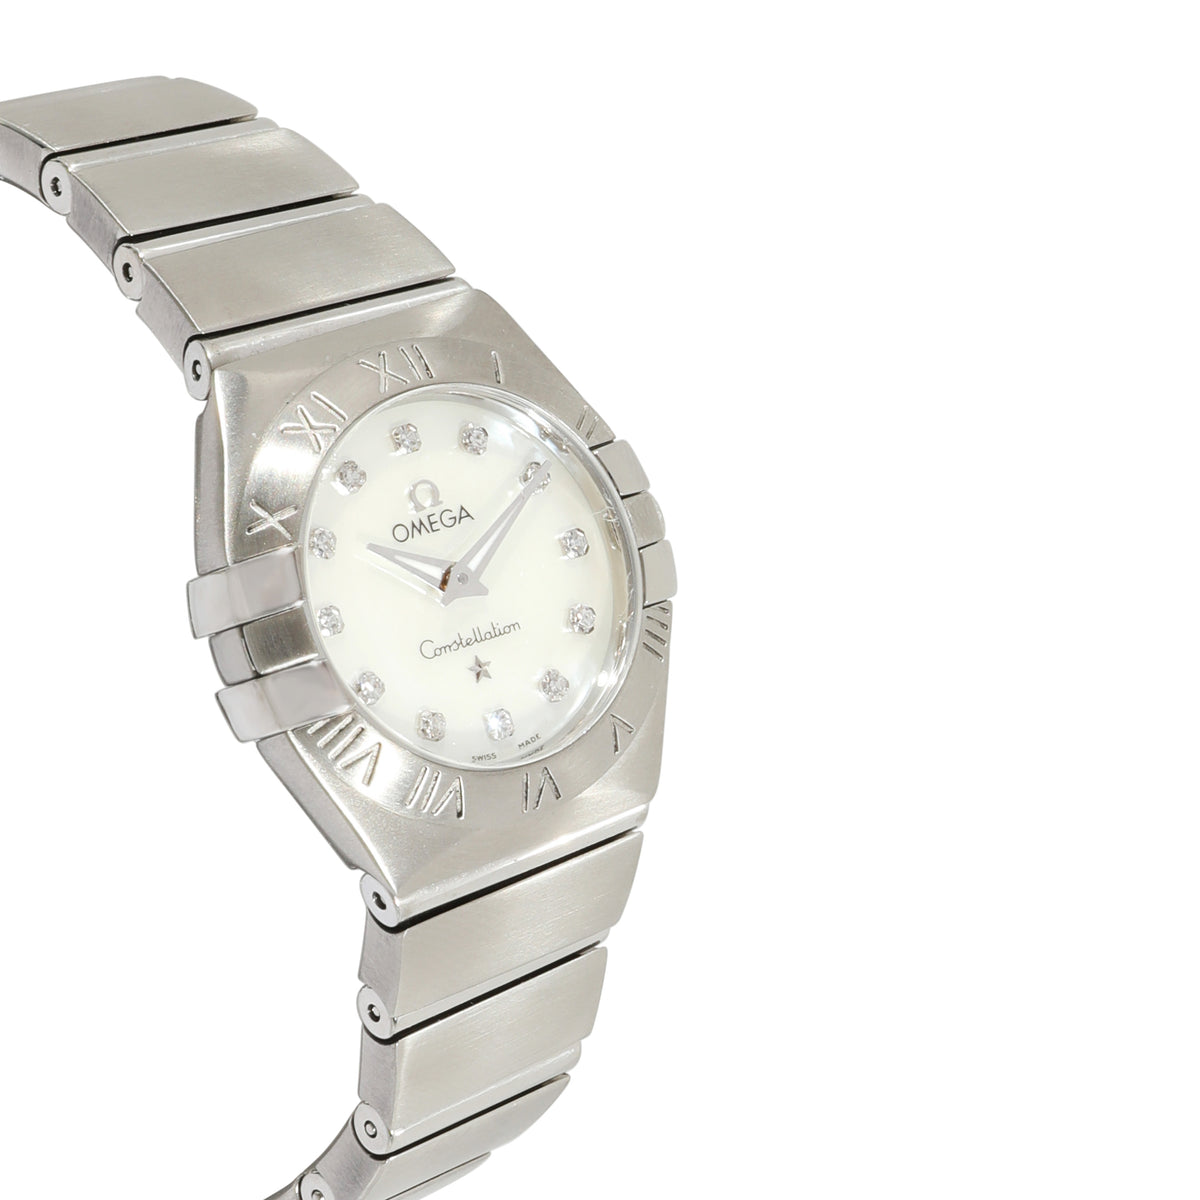 Omega Constellation 123.10.24.60.55.001 Women's Watch in  Stainless Steel